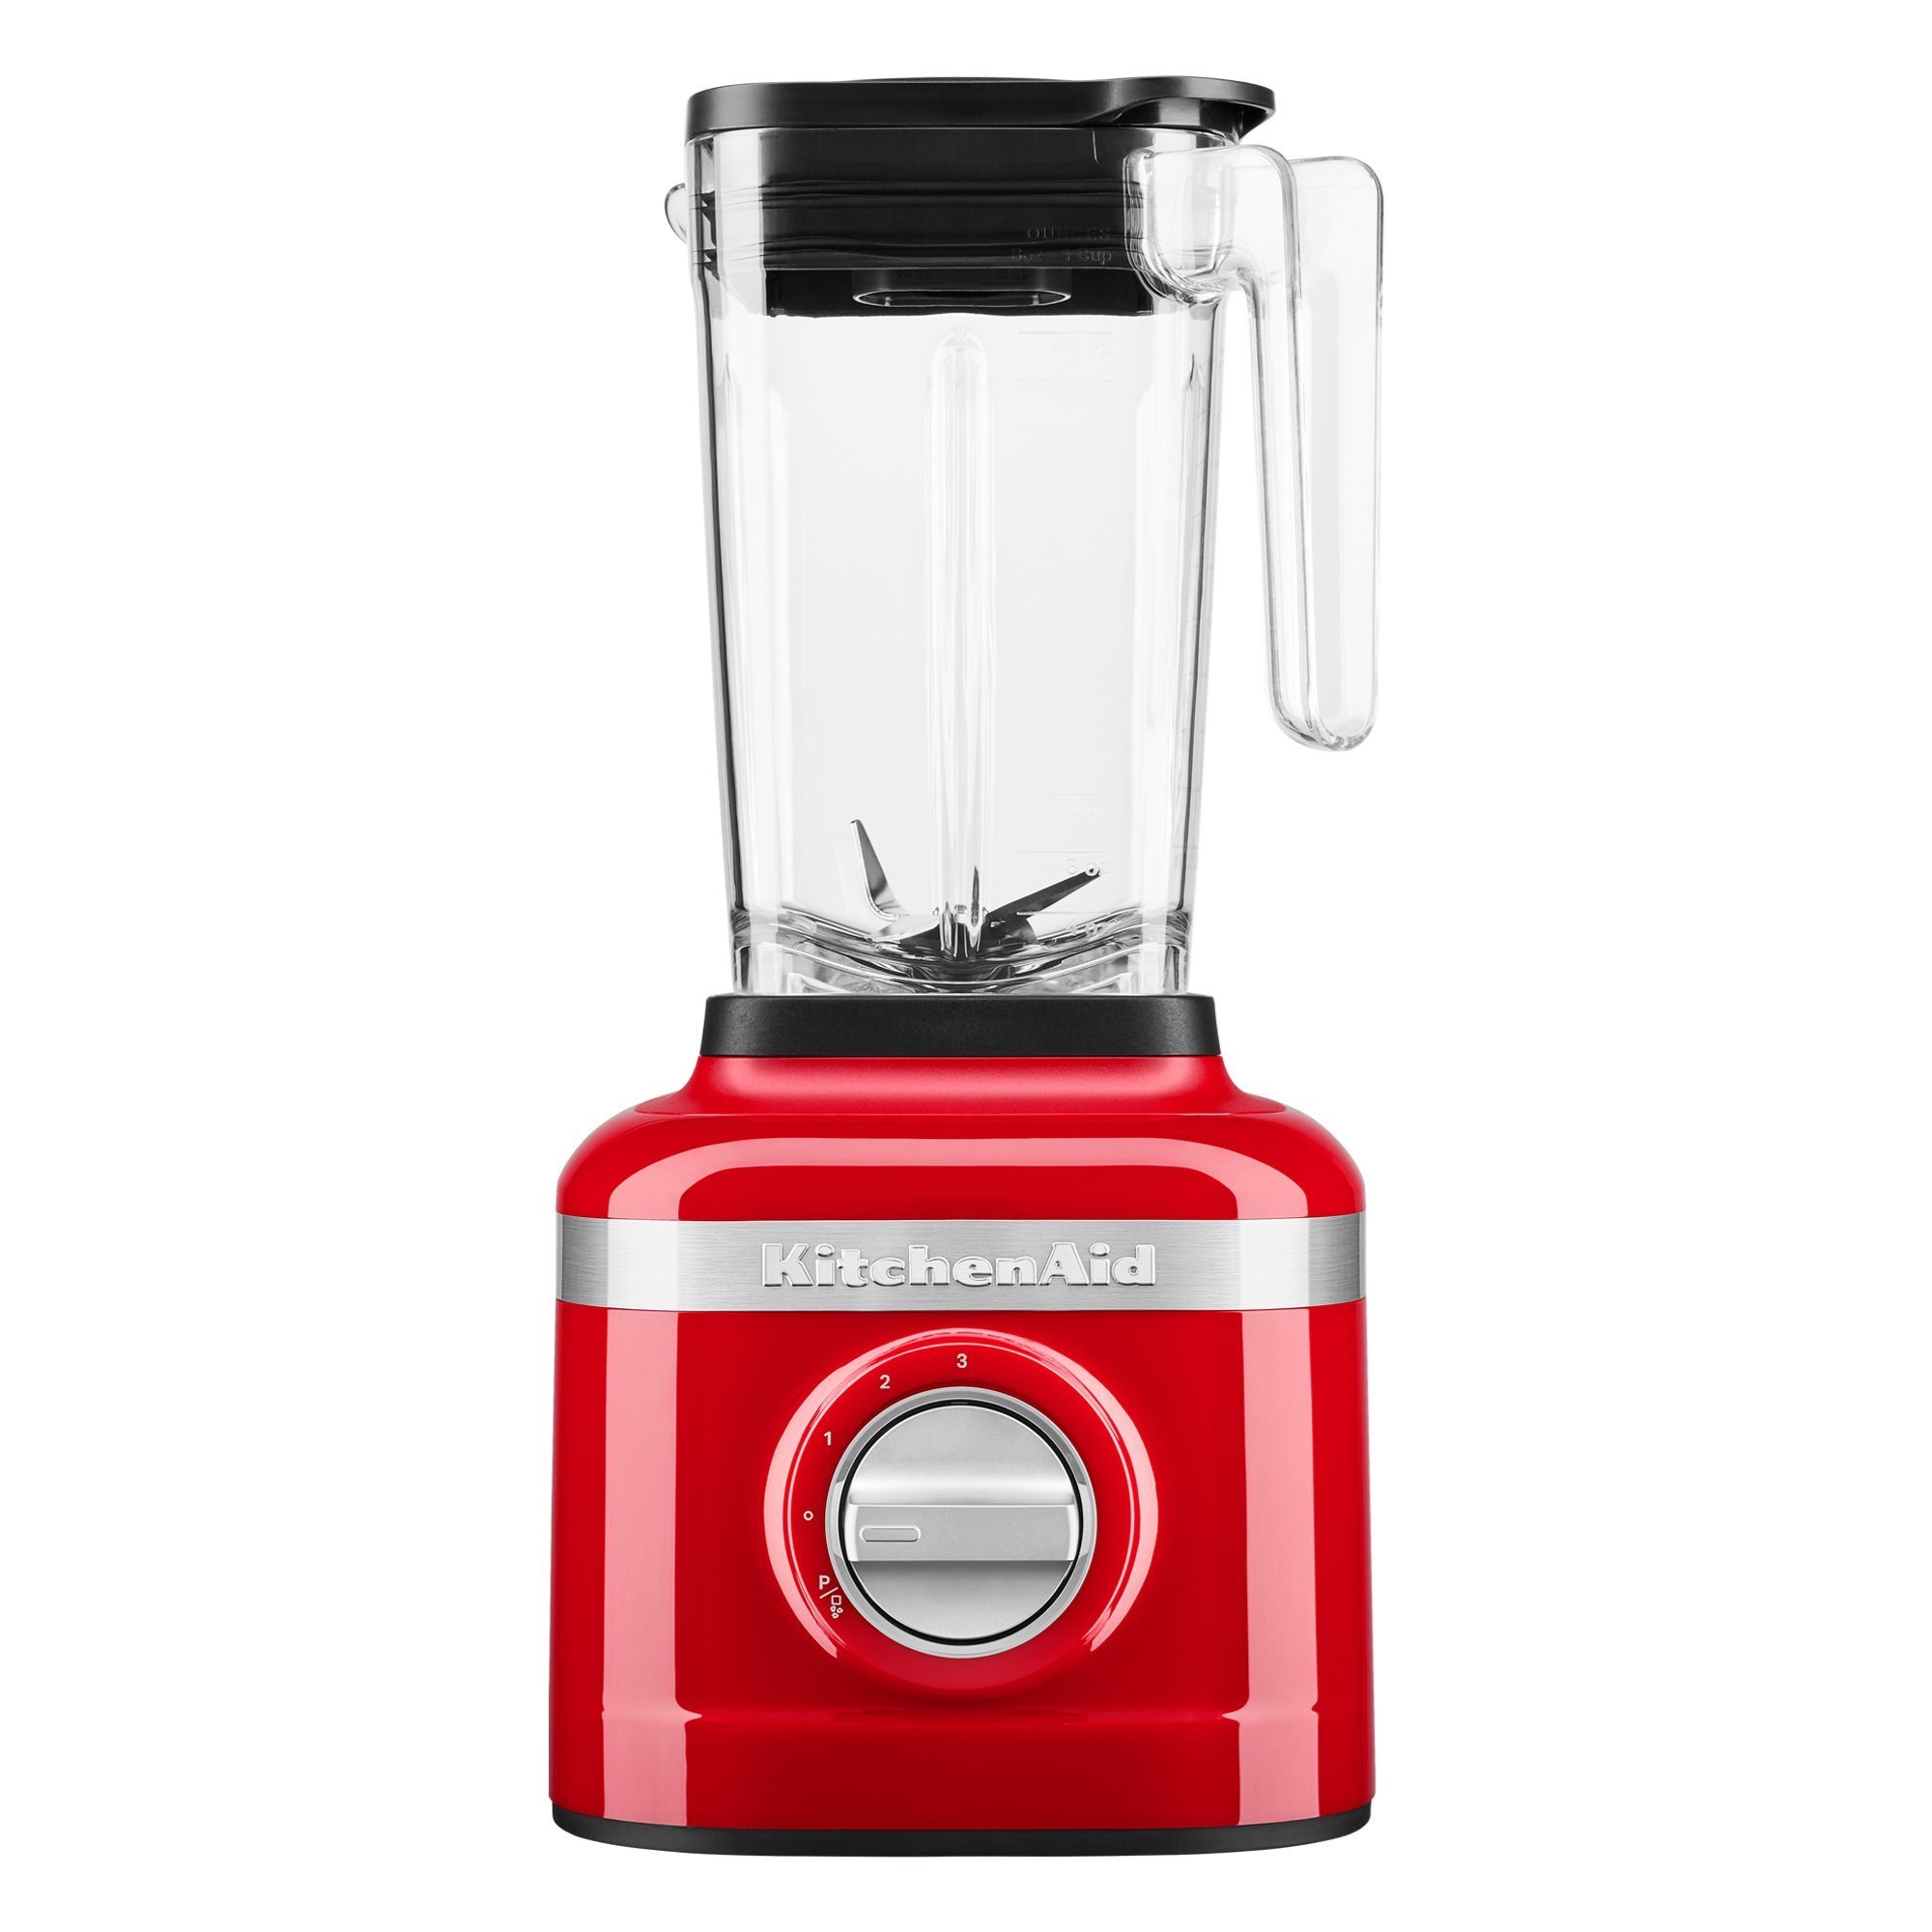 KitchenAid Chef Series 3 Cup Food Chopper Red Mini Processor Timer Kitchen  Blade for sale online